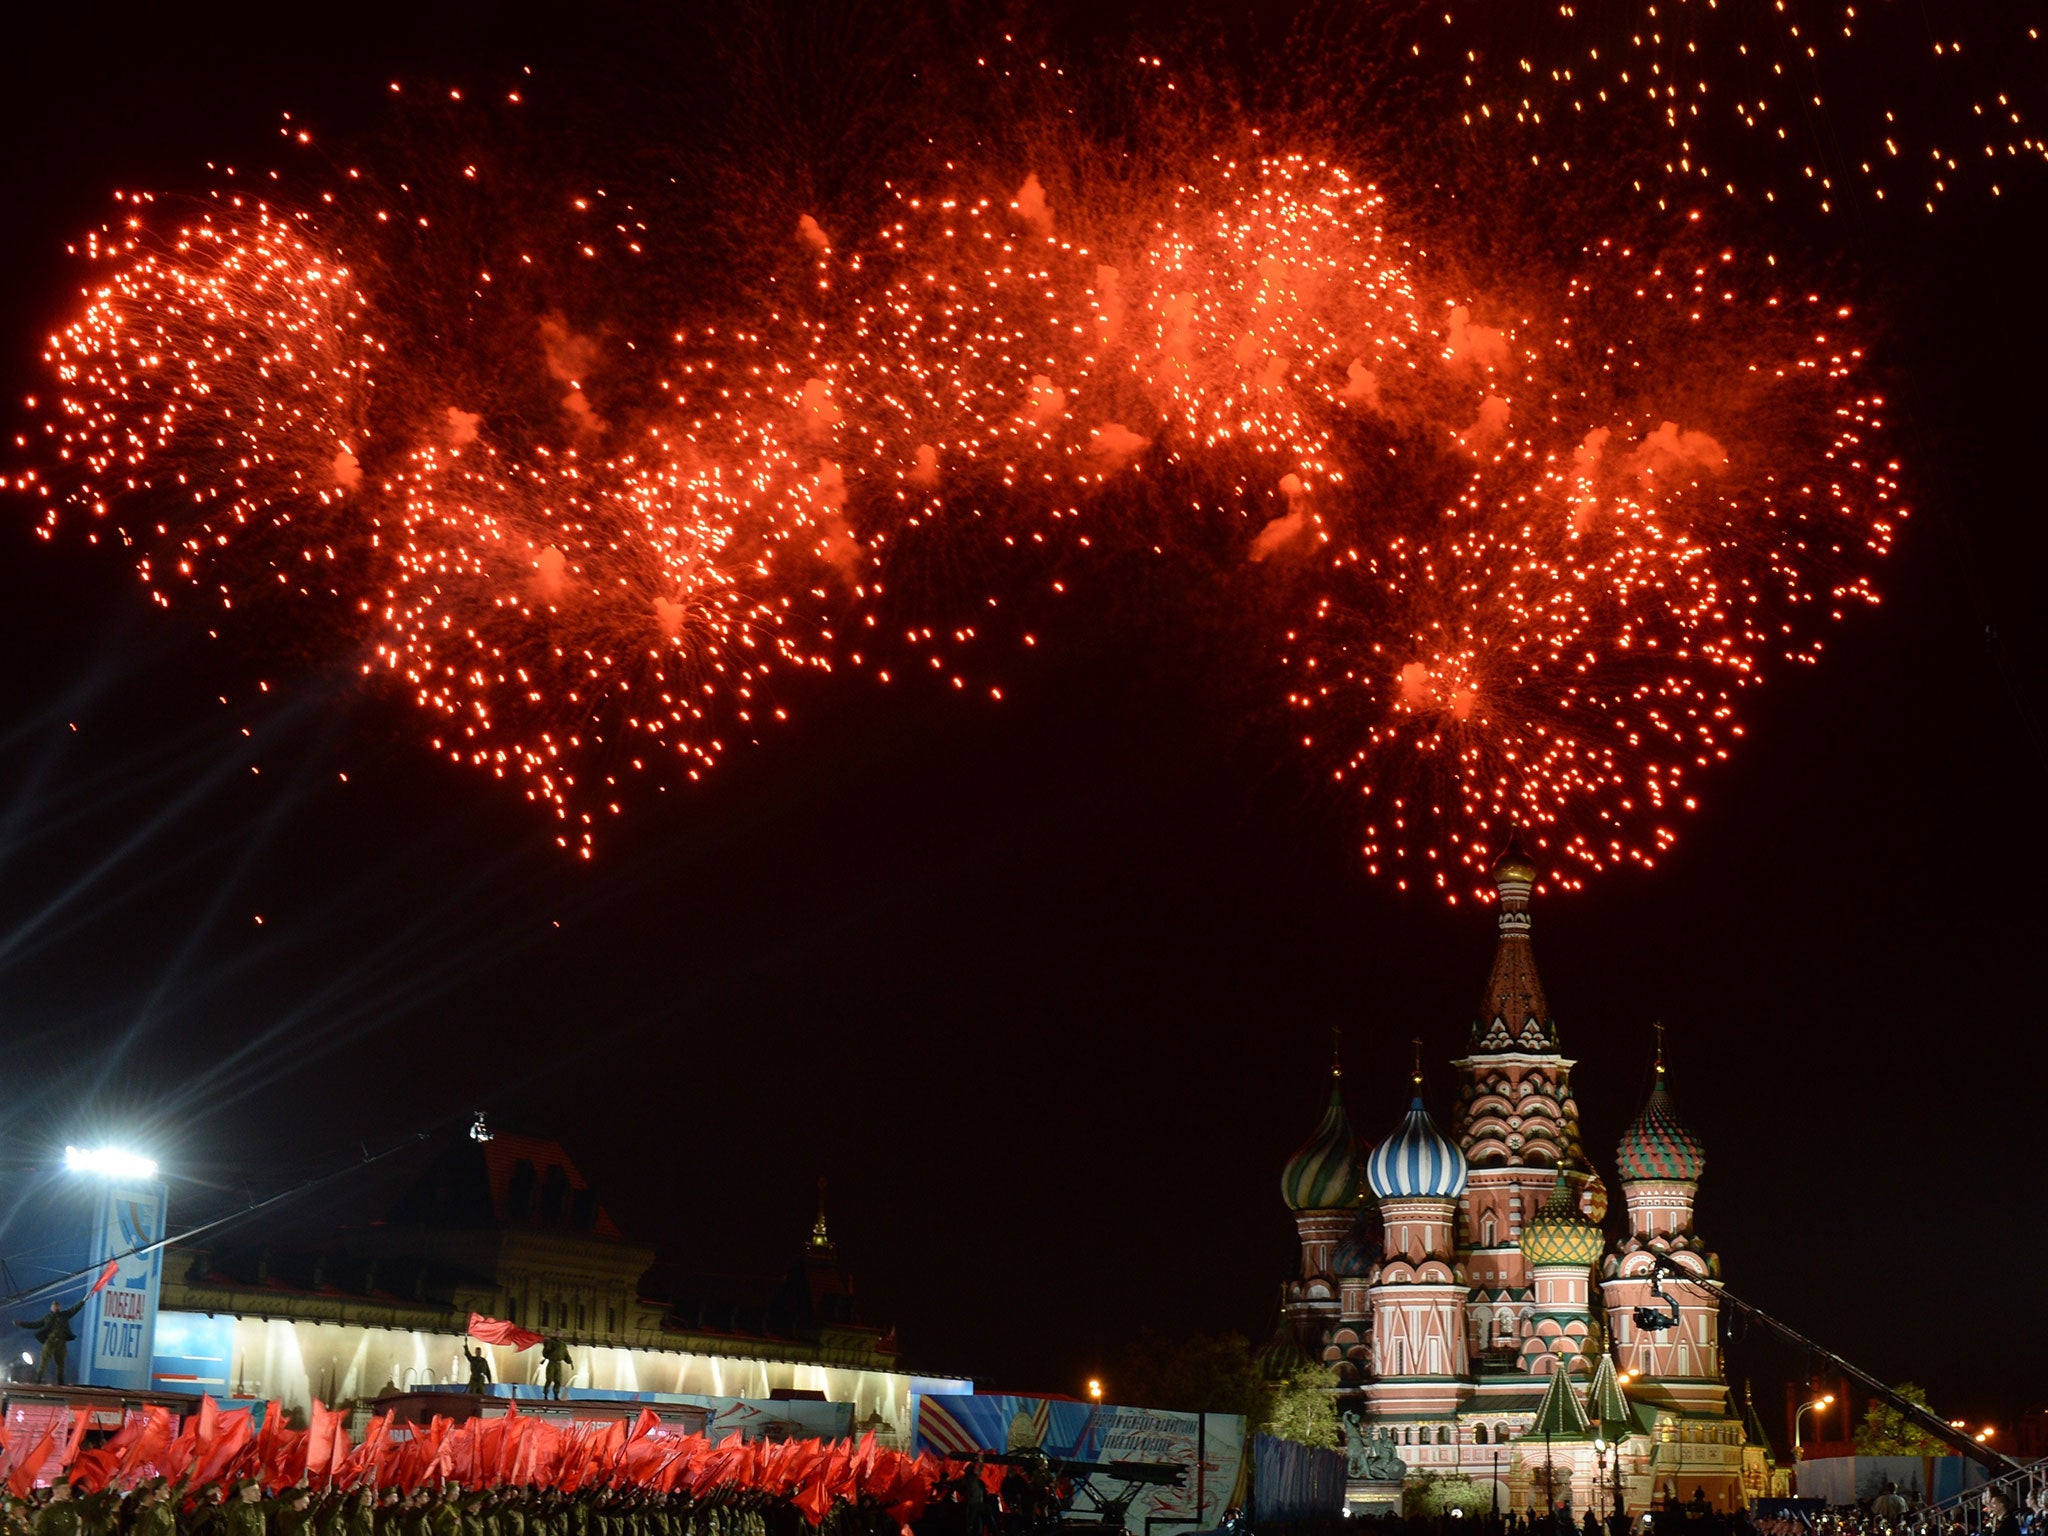 Fireworks explode above Moscow's Red Square during the Victory Day celebrations marking the 70th anniversary of the 1945 victory over Nazi Germany